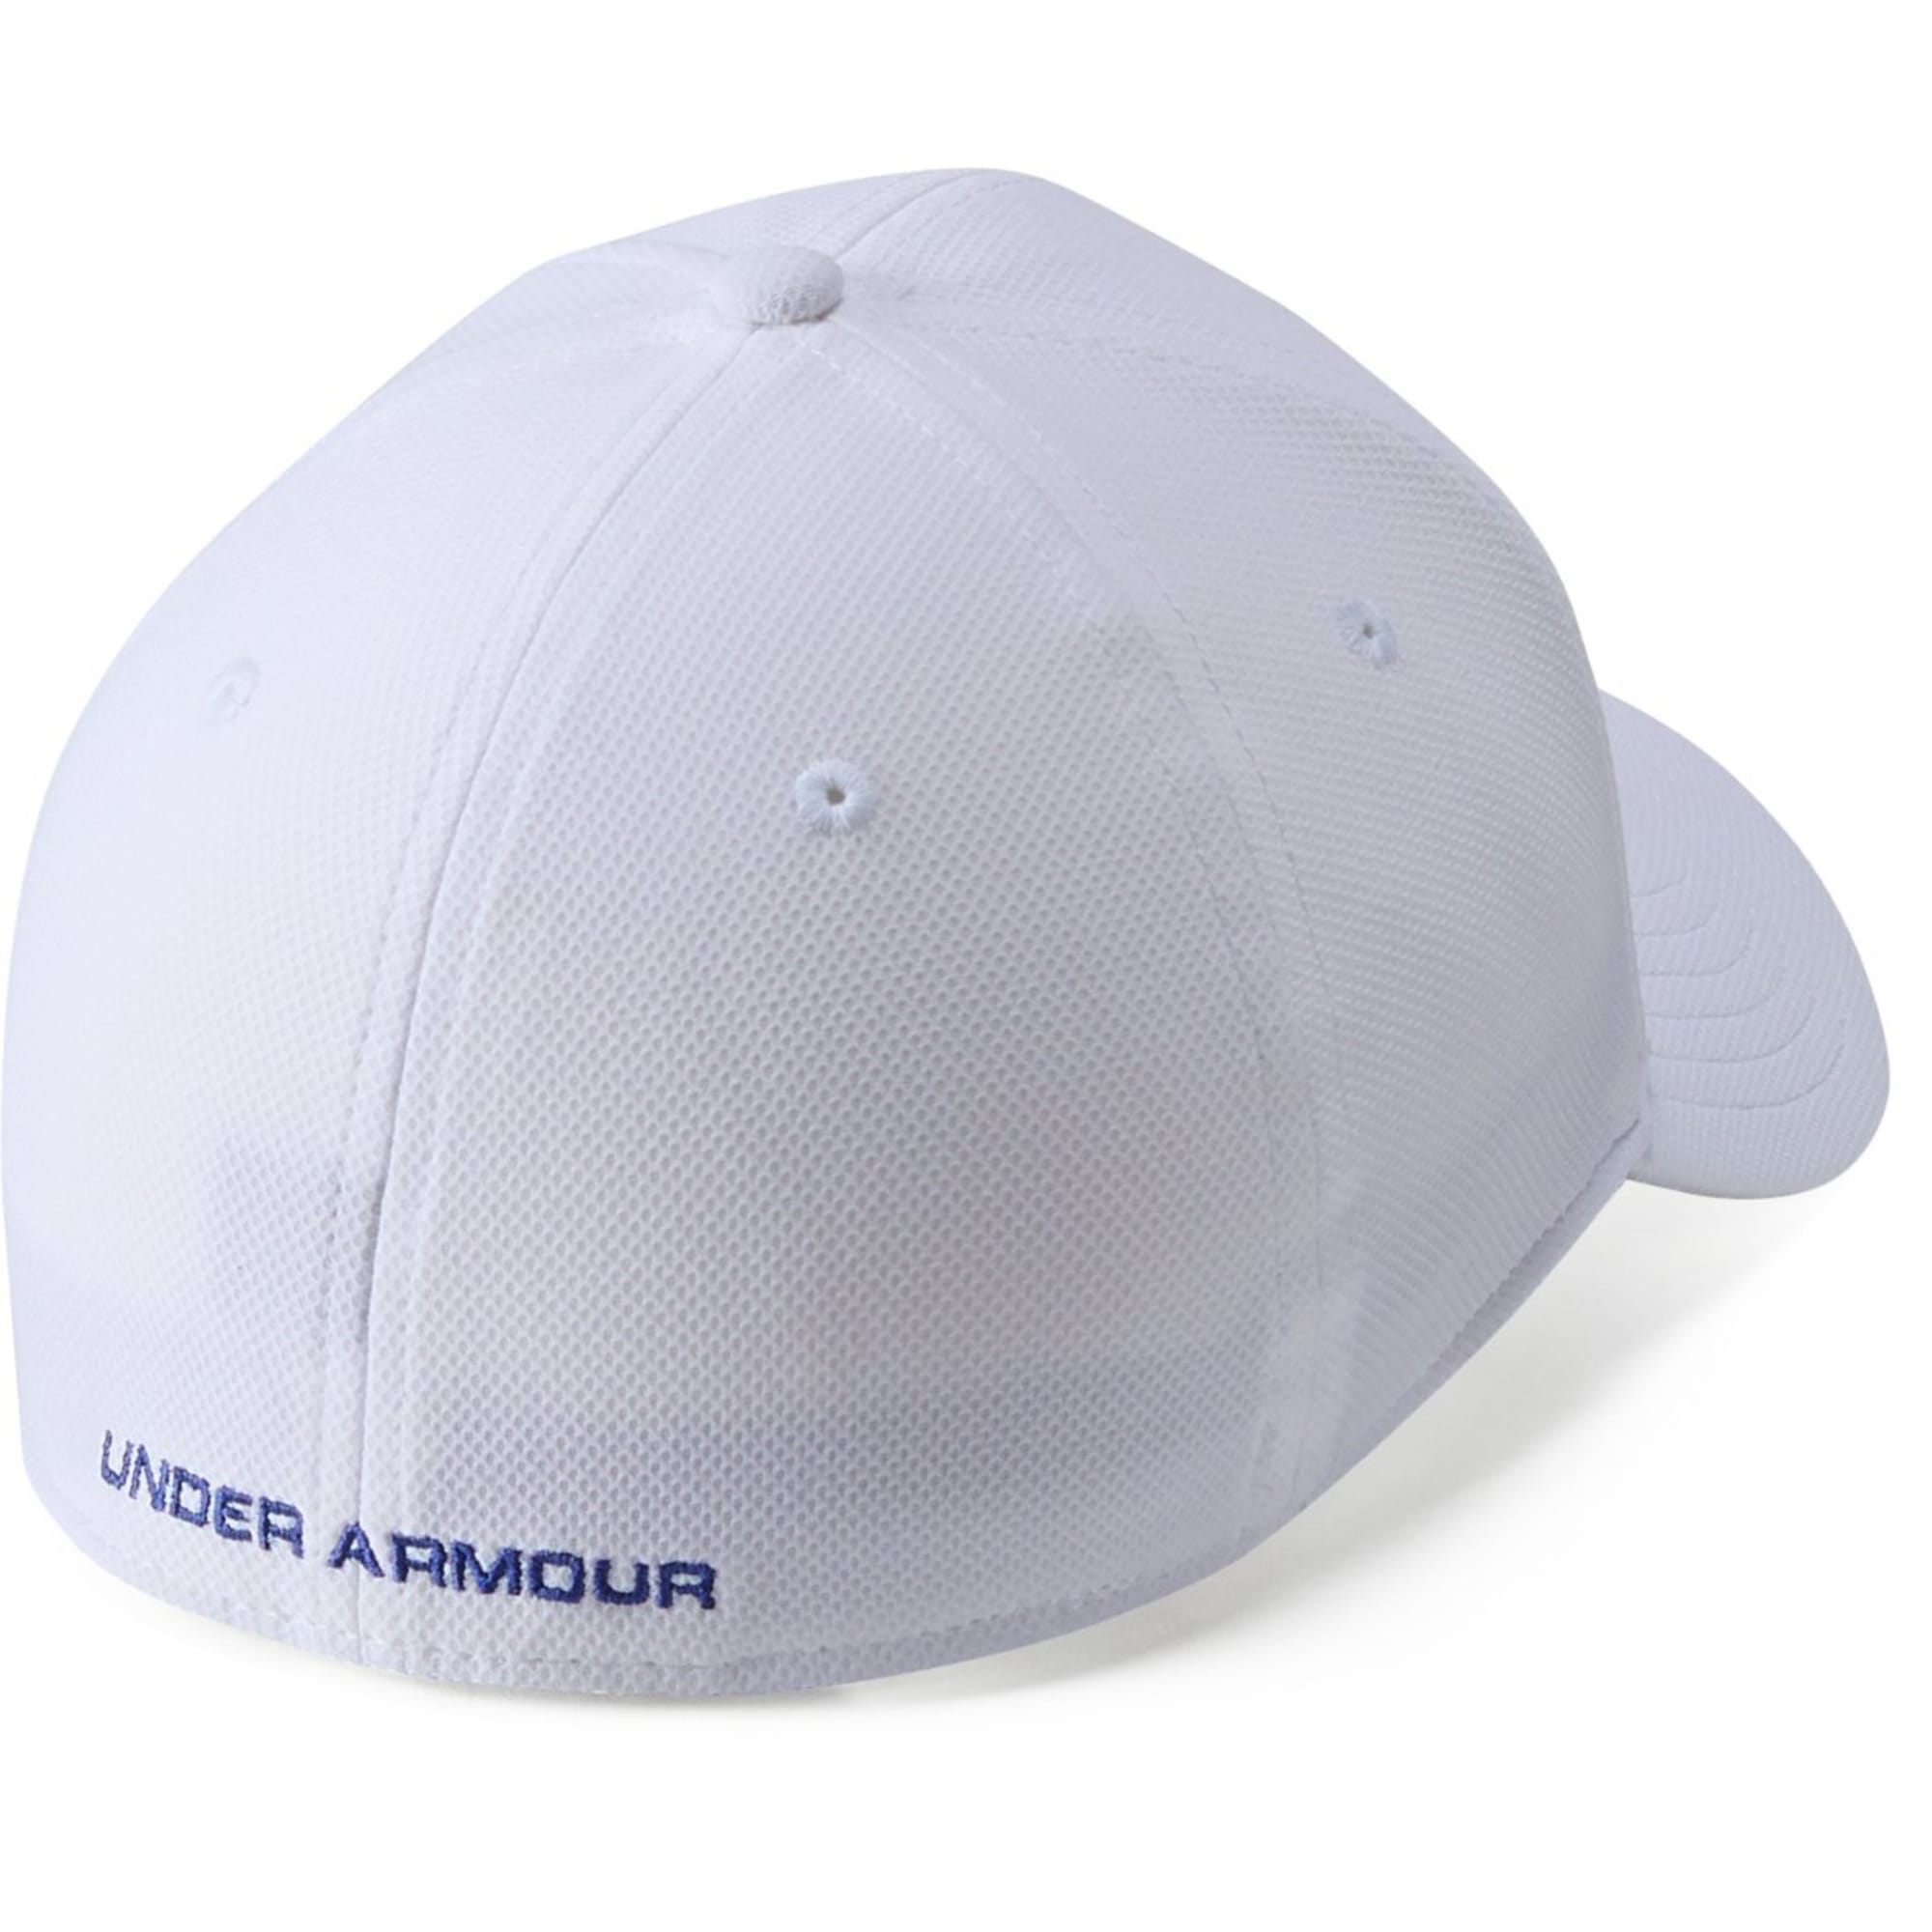 Under Armour Men's Freedom Blitzing Hat